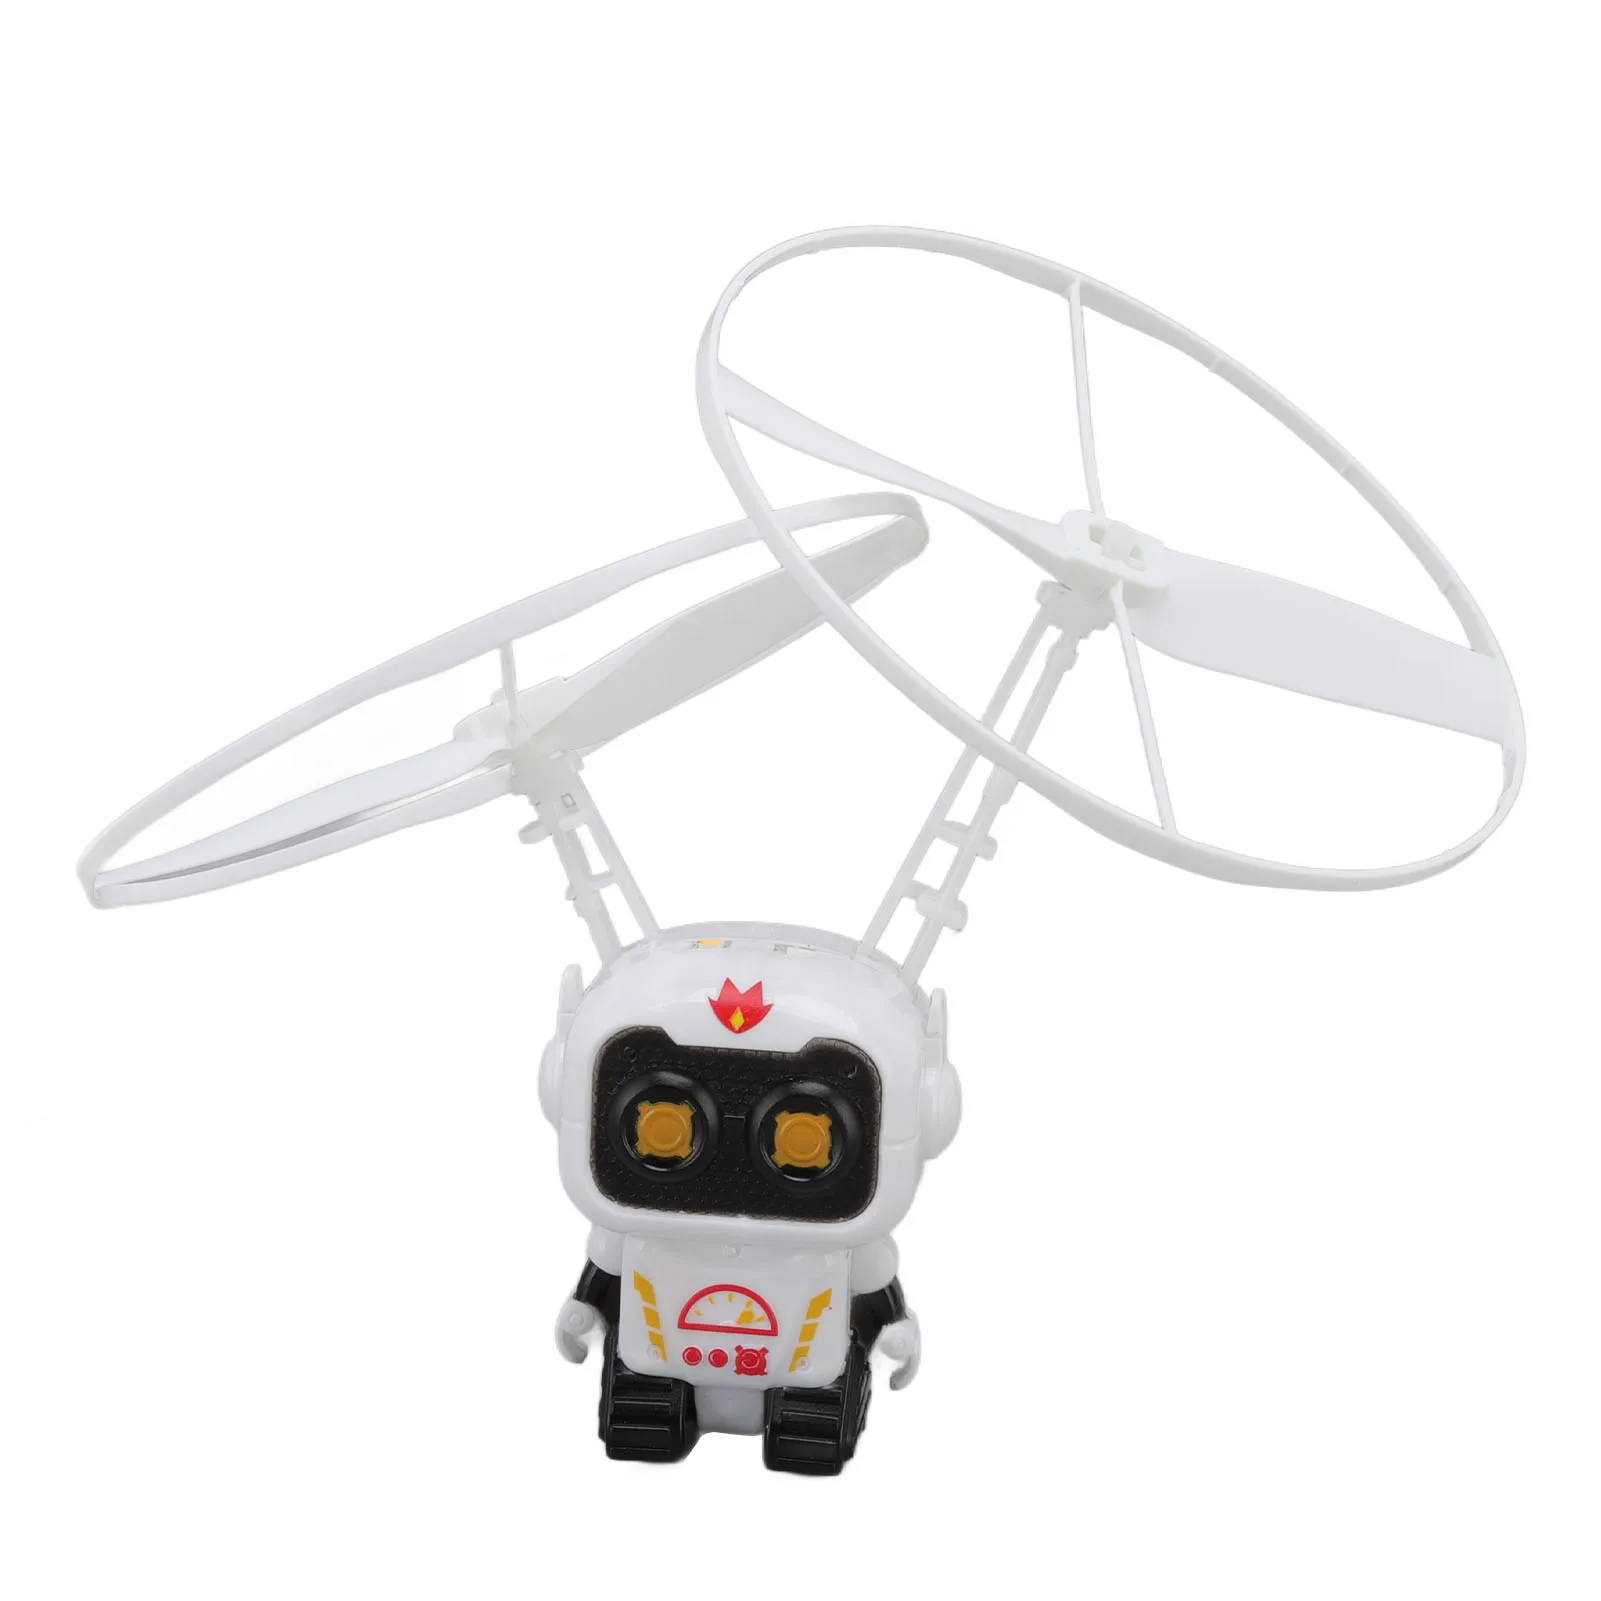 Wireless Drones Toys Infrared Induction Rc Flying Toy Built In Led Light - £12.85 GBP